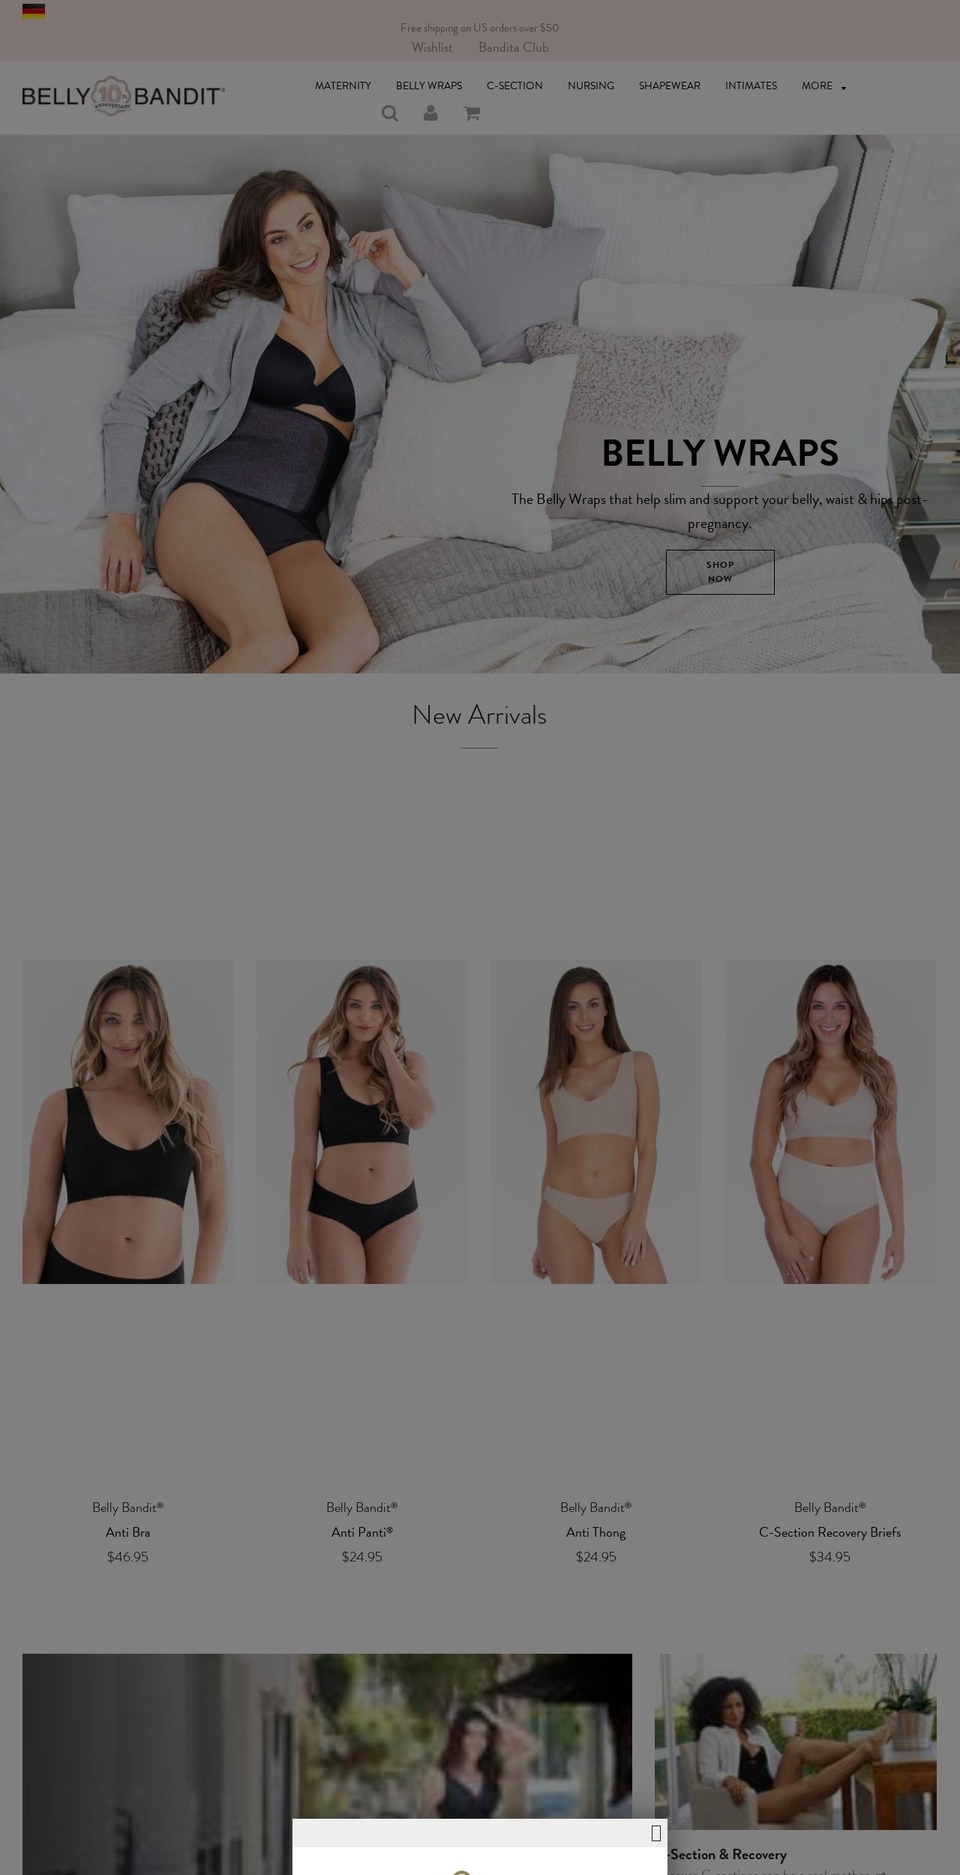 Copy of Flow Shopify theme site example bellywraps.net